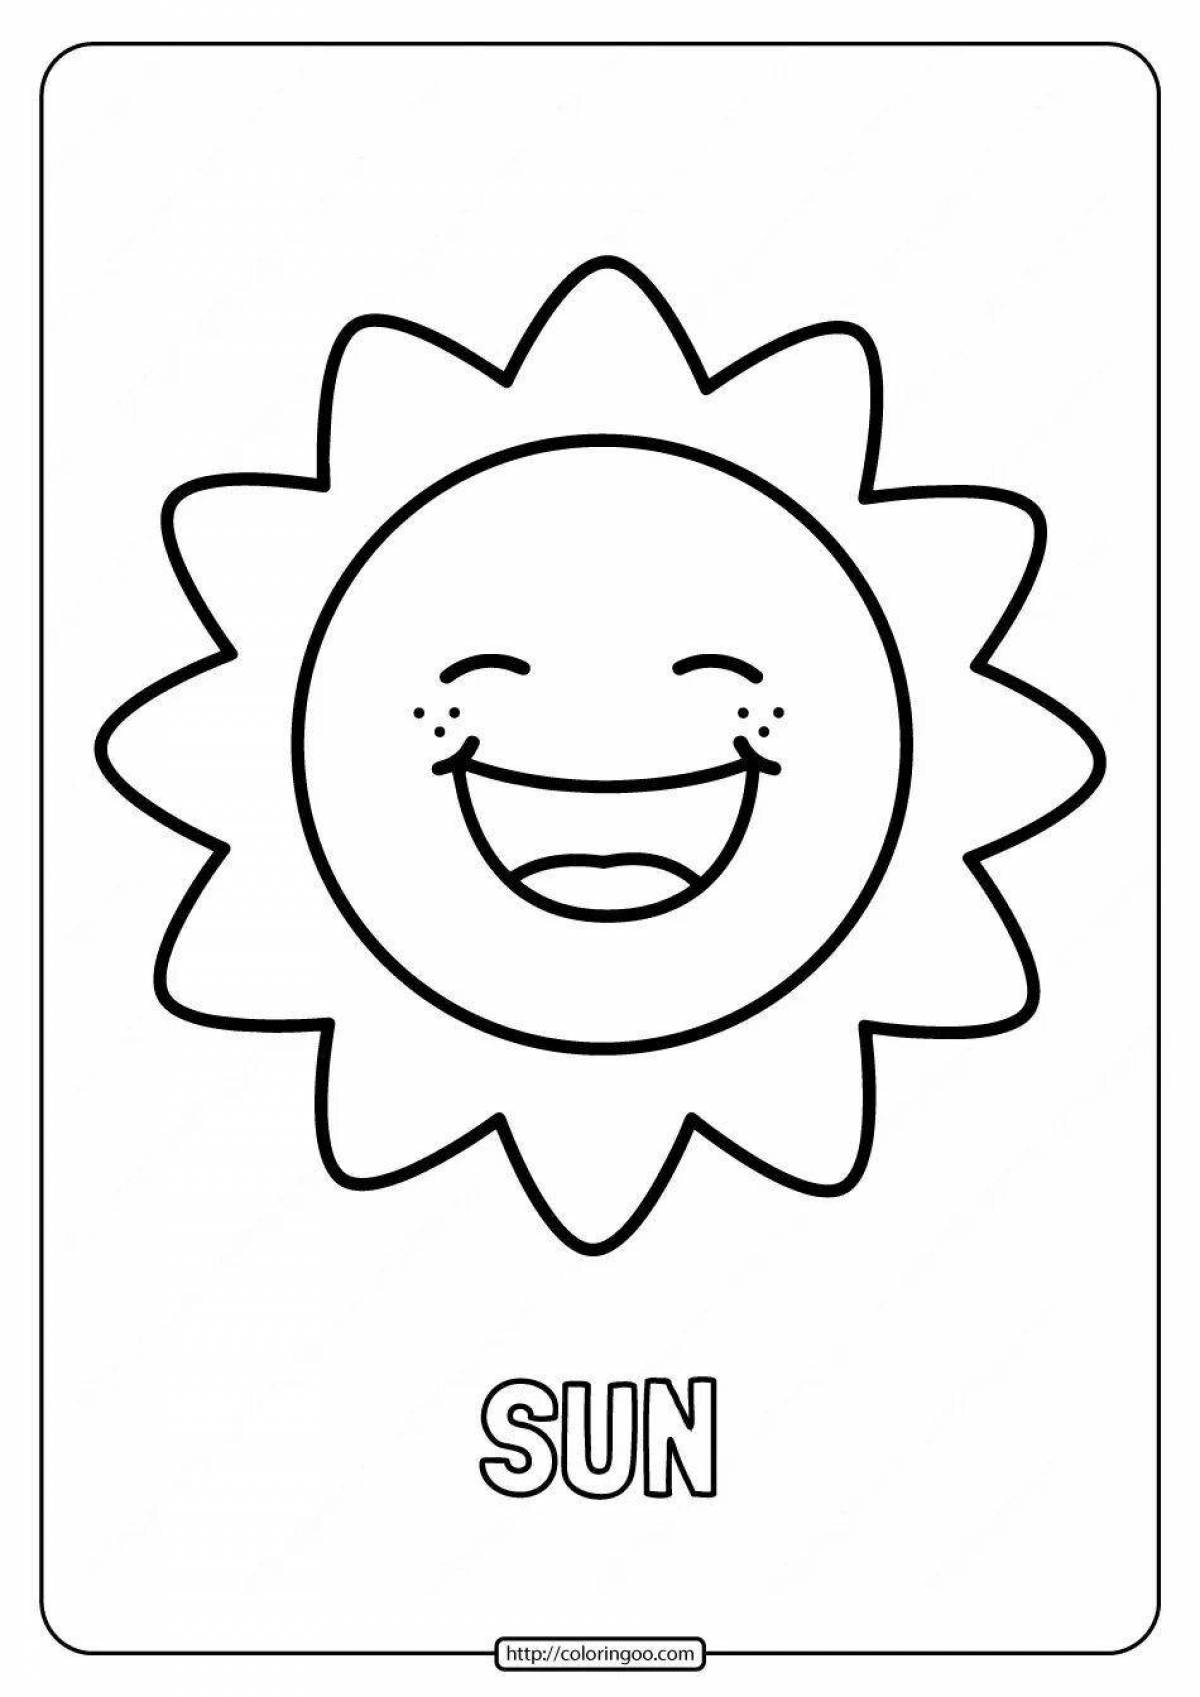 Playful sun coloring book for 4-5 year olds